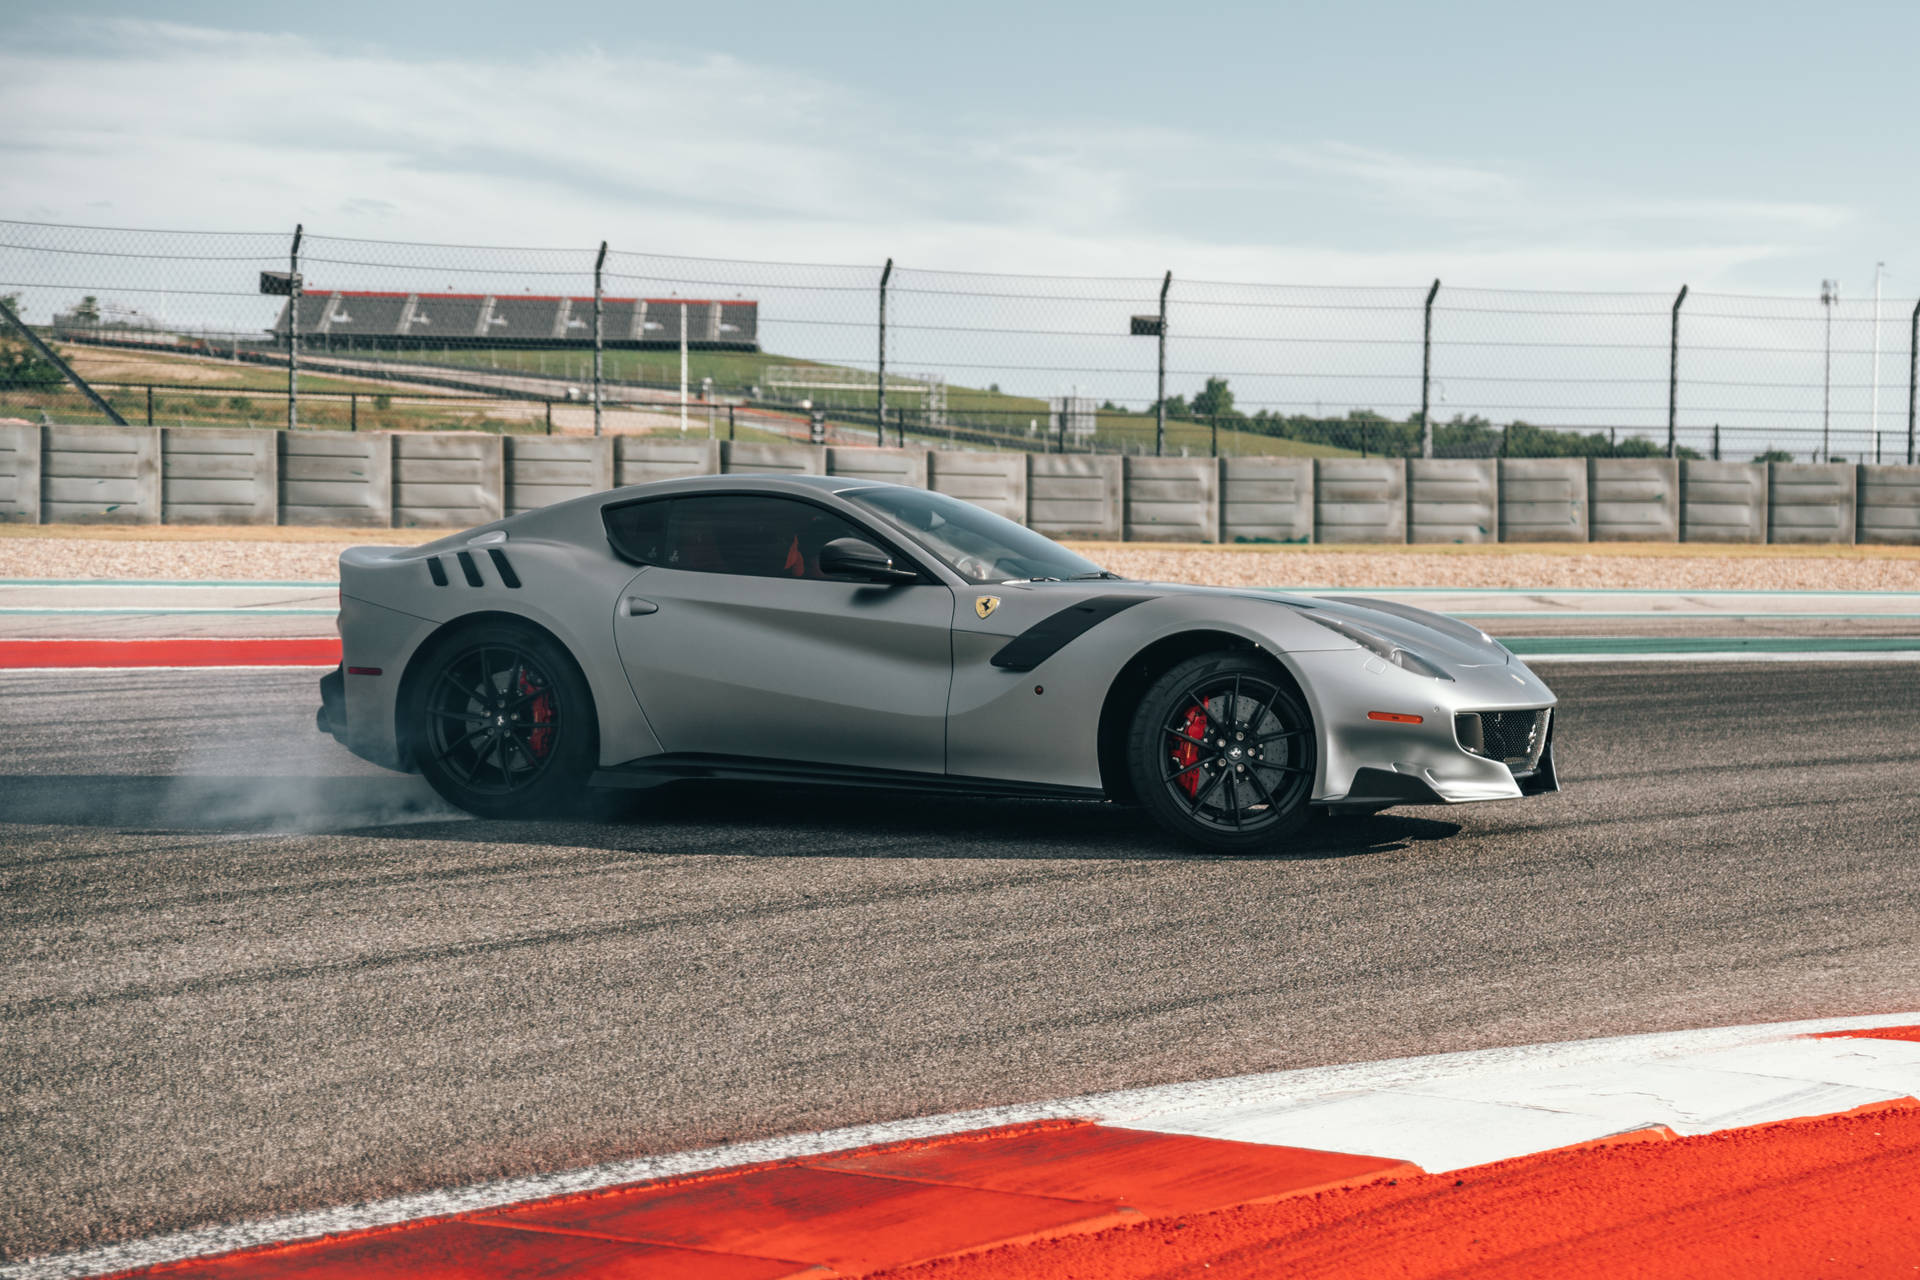 Reach Your Top Speed On The Track With The Silver Ferrari Wallpaper